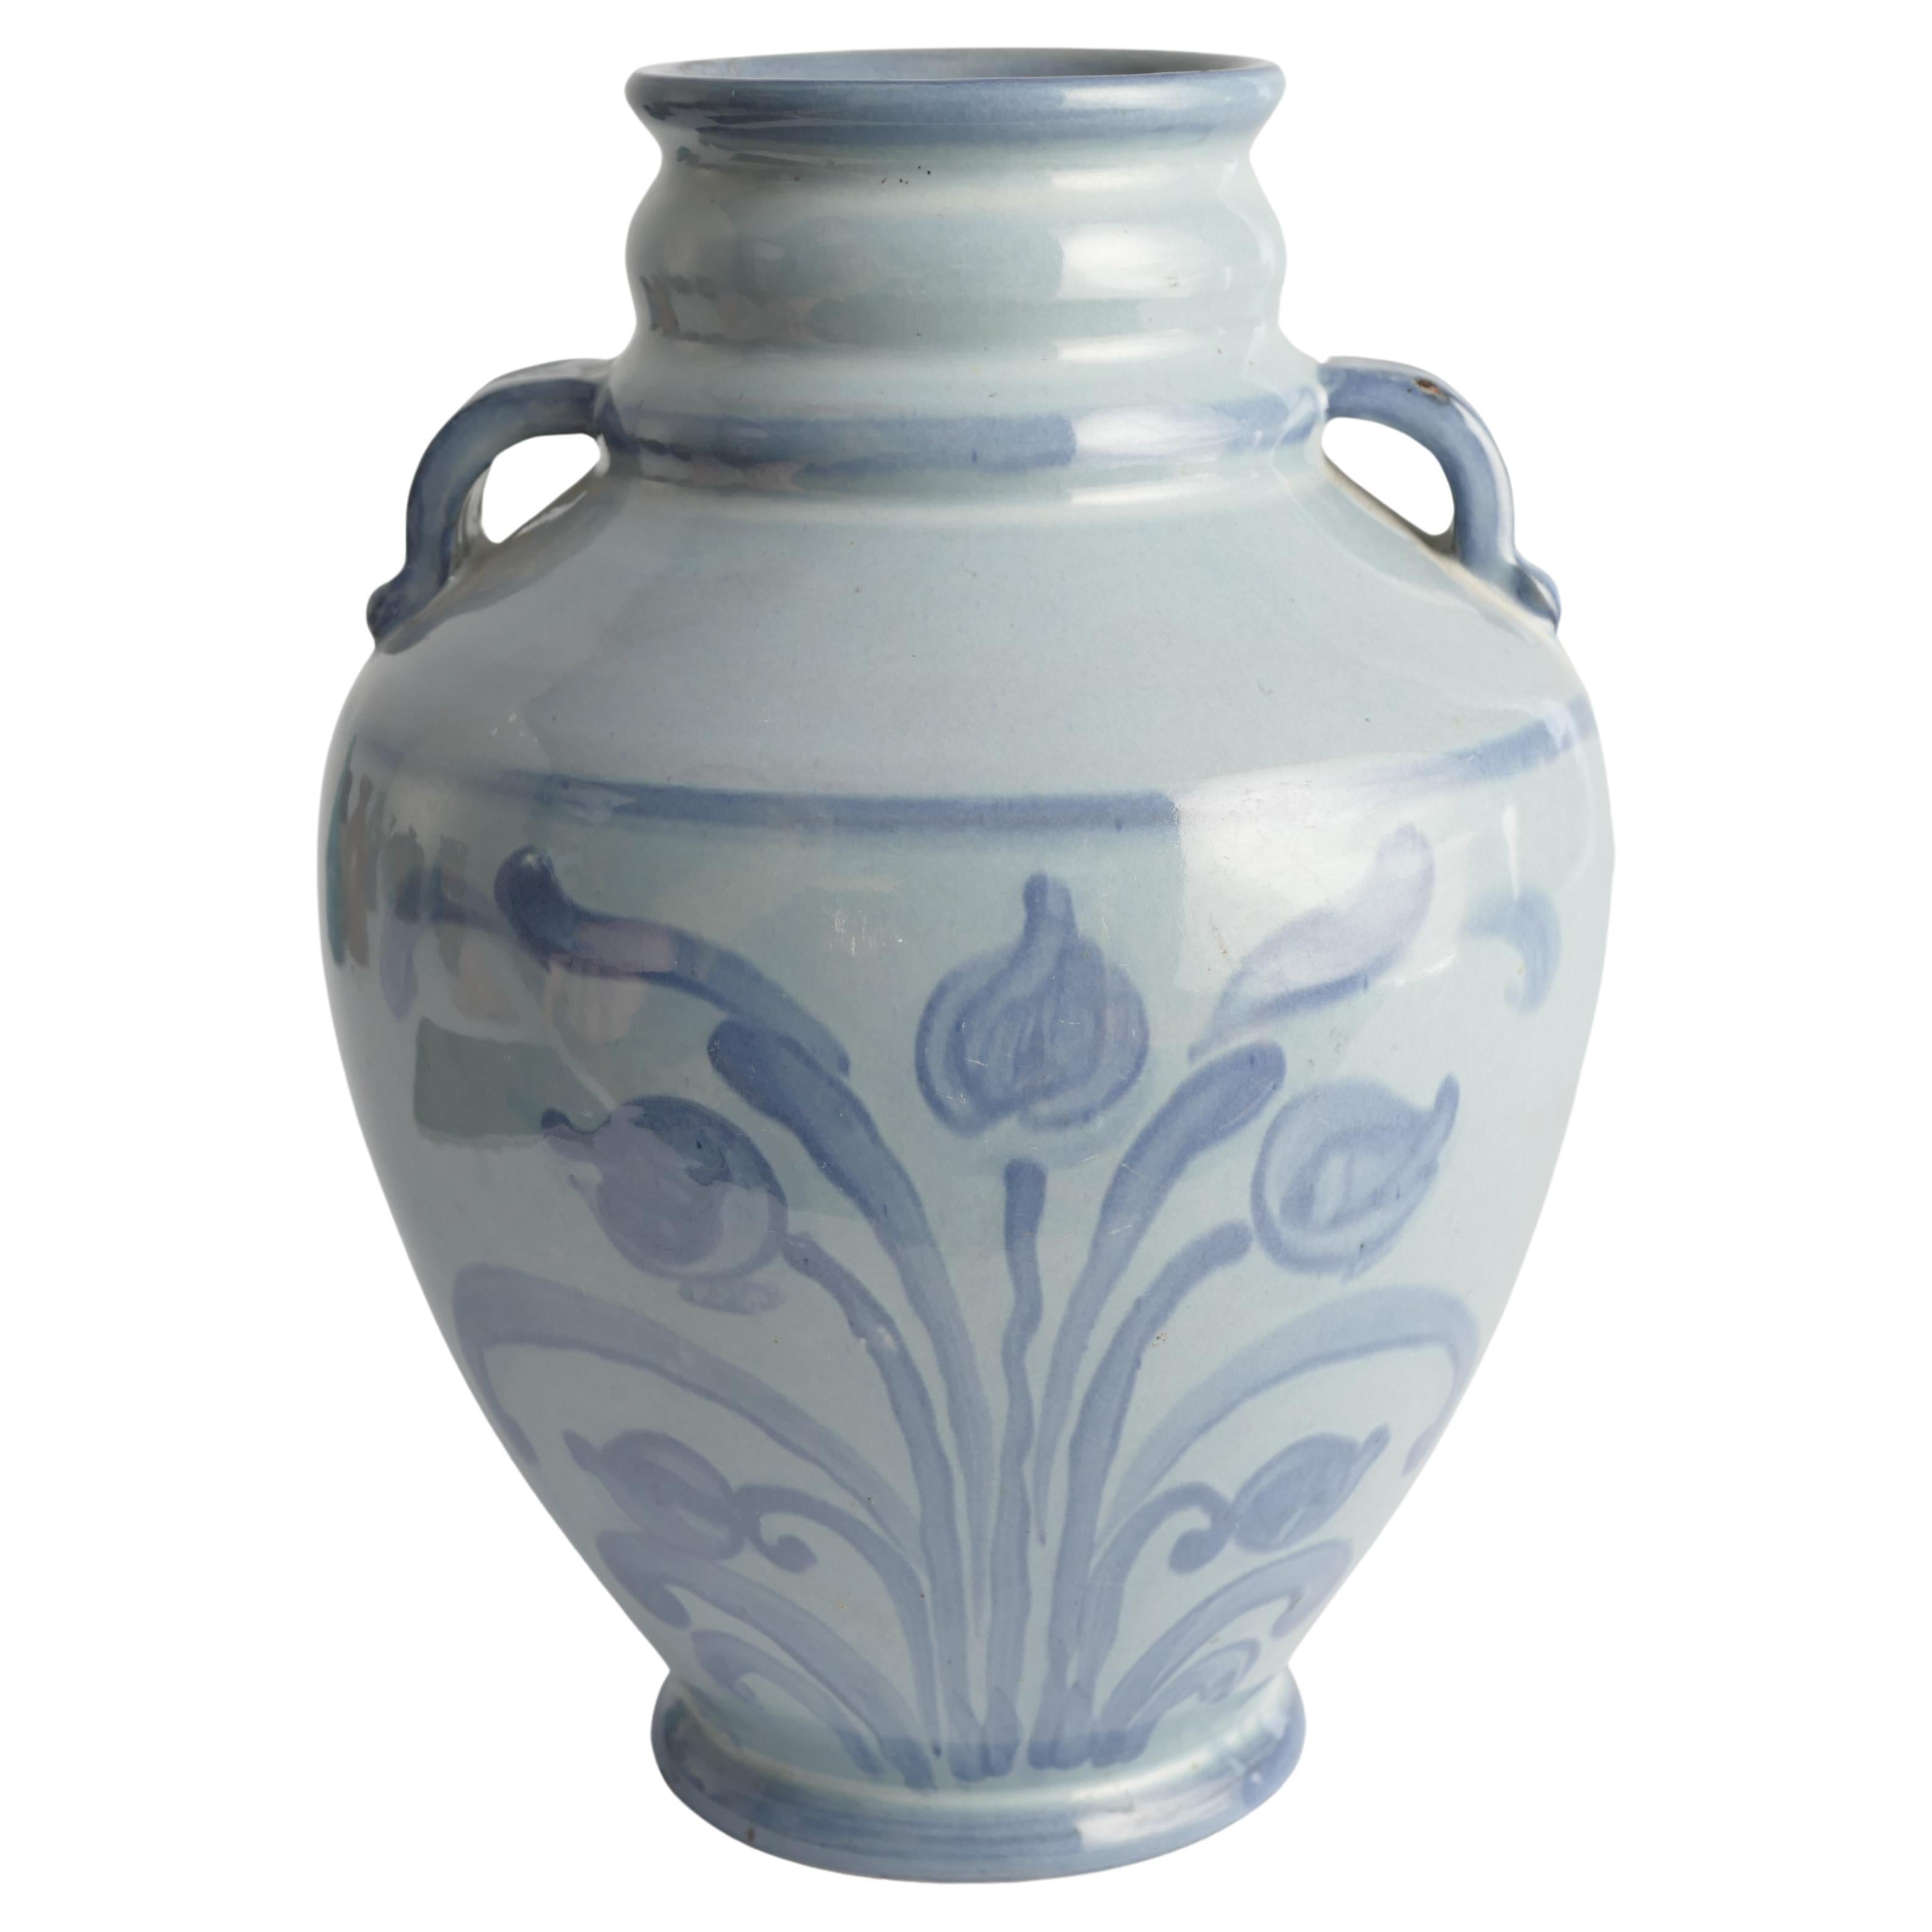 A stunningly beautiful art nouveau french blue floral motif vase with handles by Upsala Ekeby, Sweden 19 the 1920s. The floral motif is painted with free hand on two sides of the vase.

Painted on the bottom with 